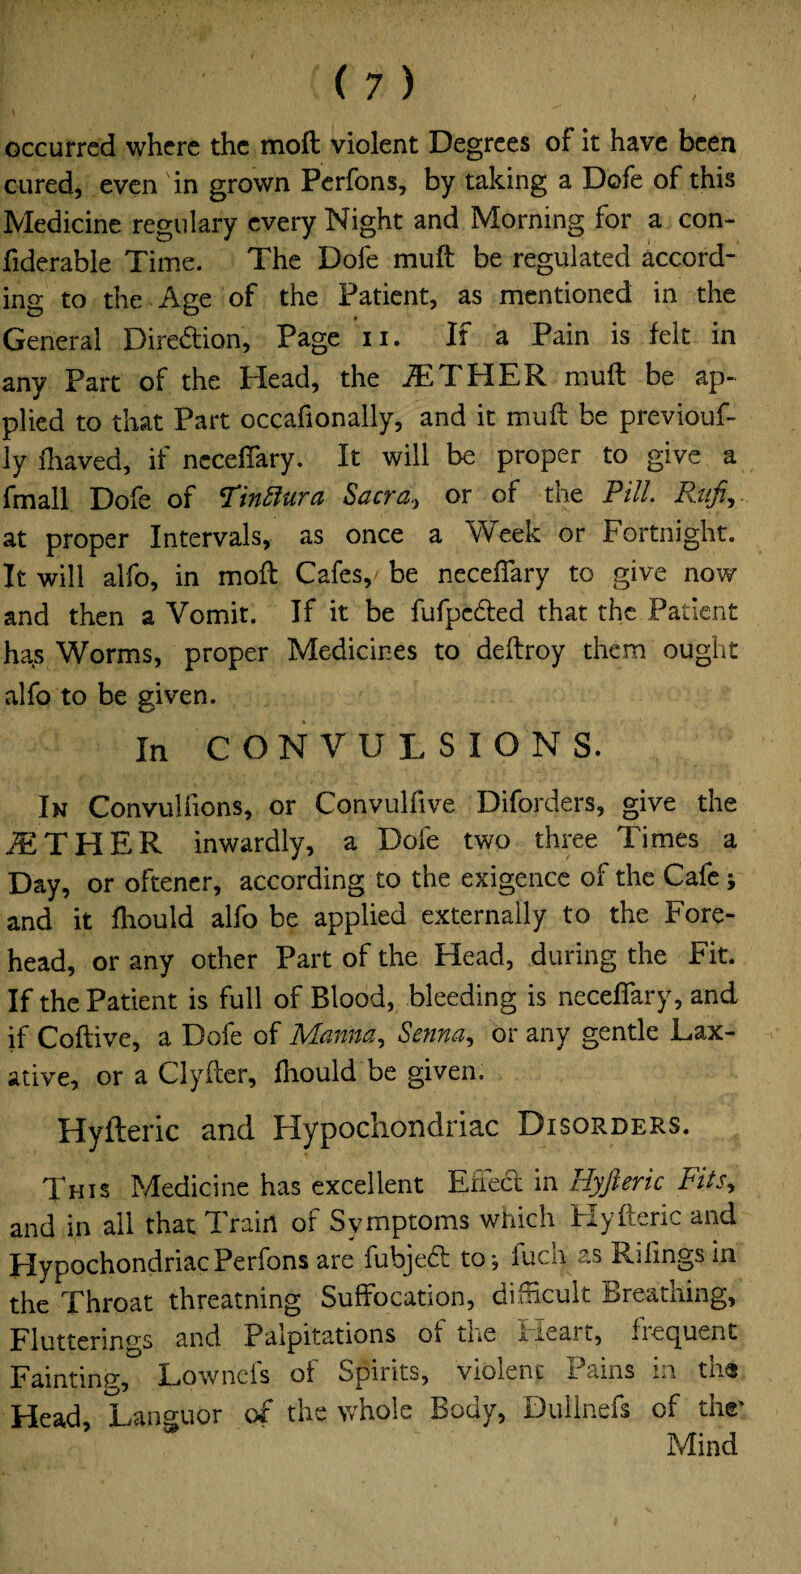 occurred where the moil violent Degrees of it have been cured, even in grown Perfons, by taking a Dofe of this Medicine regulary every Night and Morning for a con- fiderable Time. The Dofe muft be regulated accord¬ ing to the Age of the Patient, as mentioned in the General Dire&ion, Page n. If a Pain is felt in any Part of the Head, the AETHER muft be ap¬ plied to that Part occafionally, and it muft be previouf- ly fhaved, if neceftary. It will be proper to give a fmall Dofe of Tinftura Sacra, or of the Pill Raft,,. at proper Intervals, as once a Week or Fortnight. It will alfo, in moft Cafes,, be neceftary to give now and then a Vomit. If it be fufpc&ed that the Patient has Worms, proper Medicines to deftroy them ought alfo to be given. In CONVULSIONS. In Convullions, or Convulfive Diforders, give the iETHER inwardly, a Dofe two three Times a Day, or oftener, according to the exigence of the Calc * and it fhould alfo be applied externally to the Fore¬ head, or any other Part of the Head, during the Fit. If the Patient is full of Blood, bleeding is neceftary, and if Coftive, a Dofe of Manna, Senna, or any gentle Lax¬ ative, or a Clyfter, fhould be given. Hyfteric and Hypochondriac Disorders. This Medicine has excellent Effect in Hyfteric Fits, and in all that Train of Symptoms which Hyfteric and Hypochondriac Perfons are fubjedt to; fuch as Pilings in the Throat threatning Suffocation, difticult Breathing, Flutterings and Palpitations of the lieait, liecjpent Fainting, Lownefs of Spirits, violent Pains in th« Head, Languor of the whole Body, Dullnefs of thr Mind